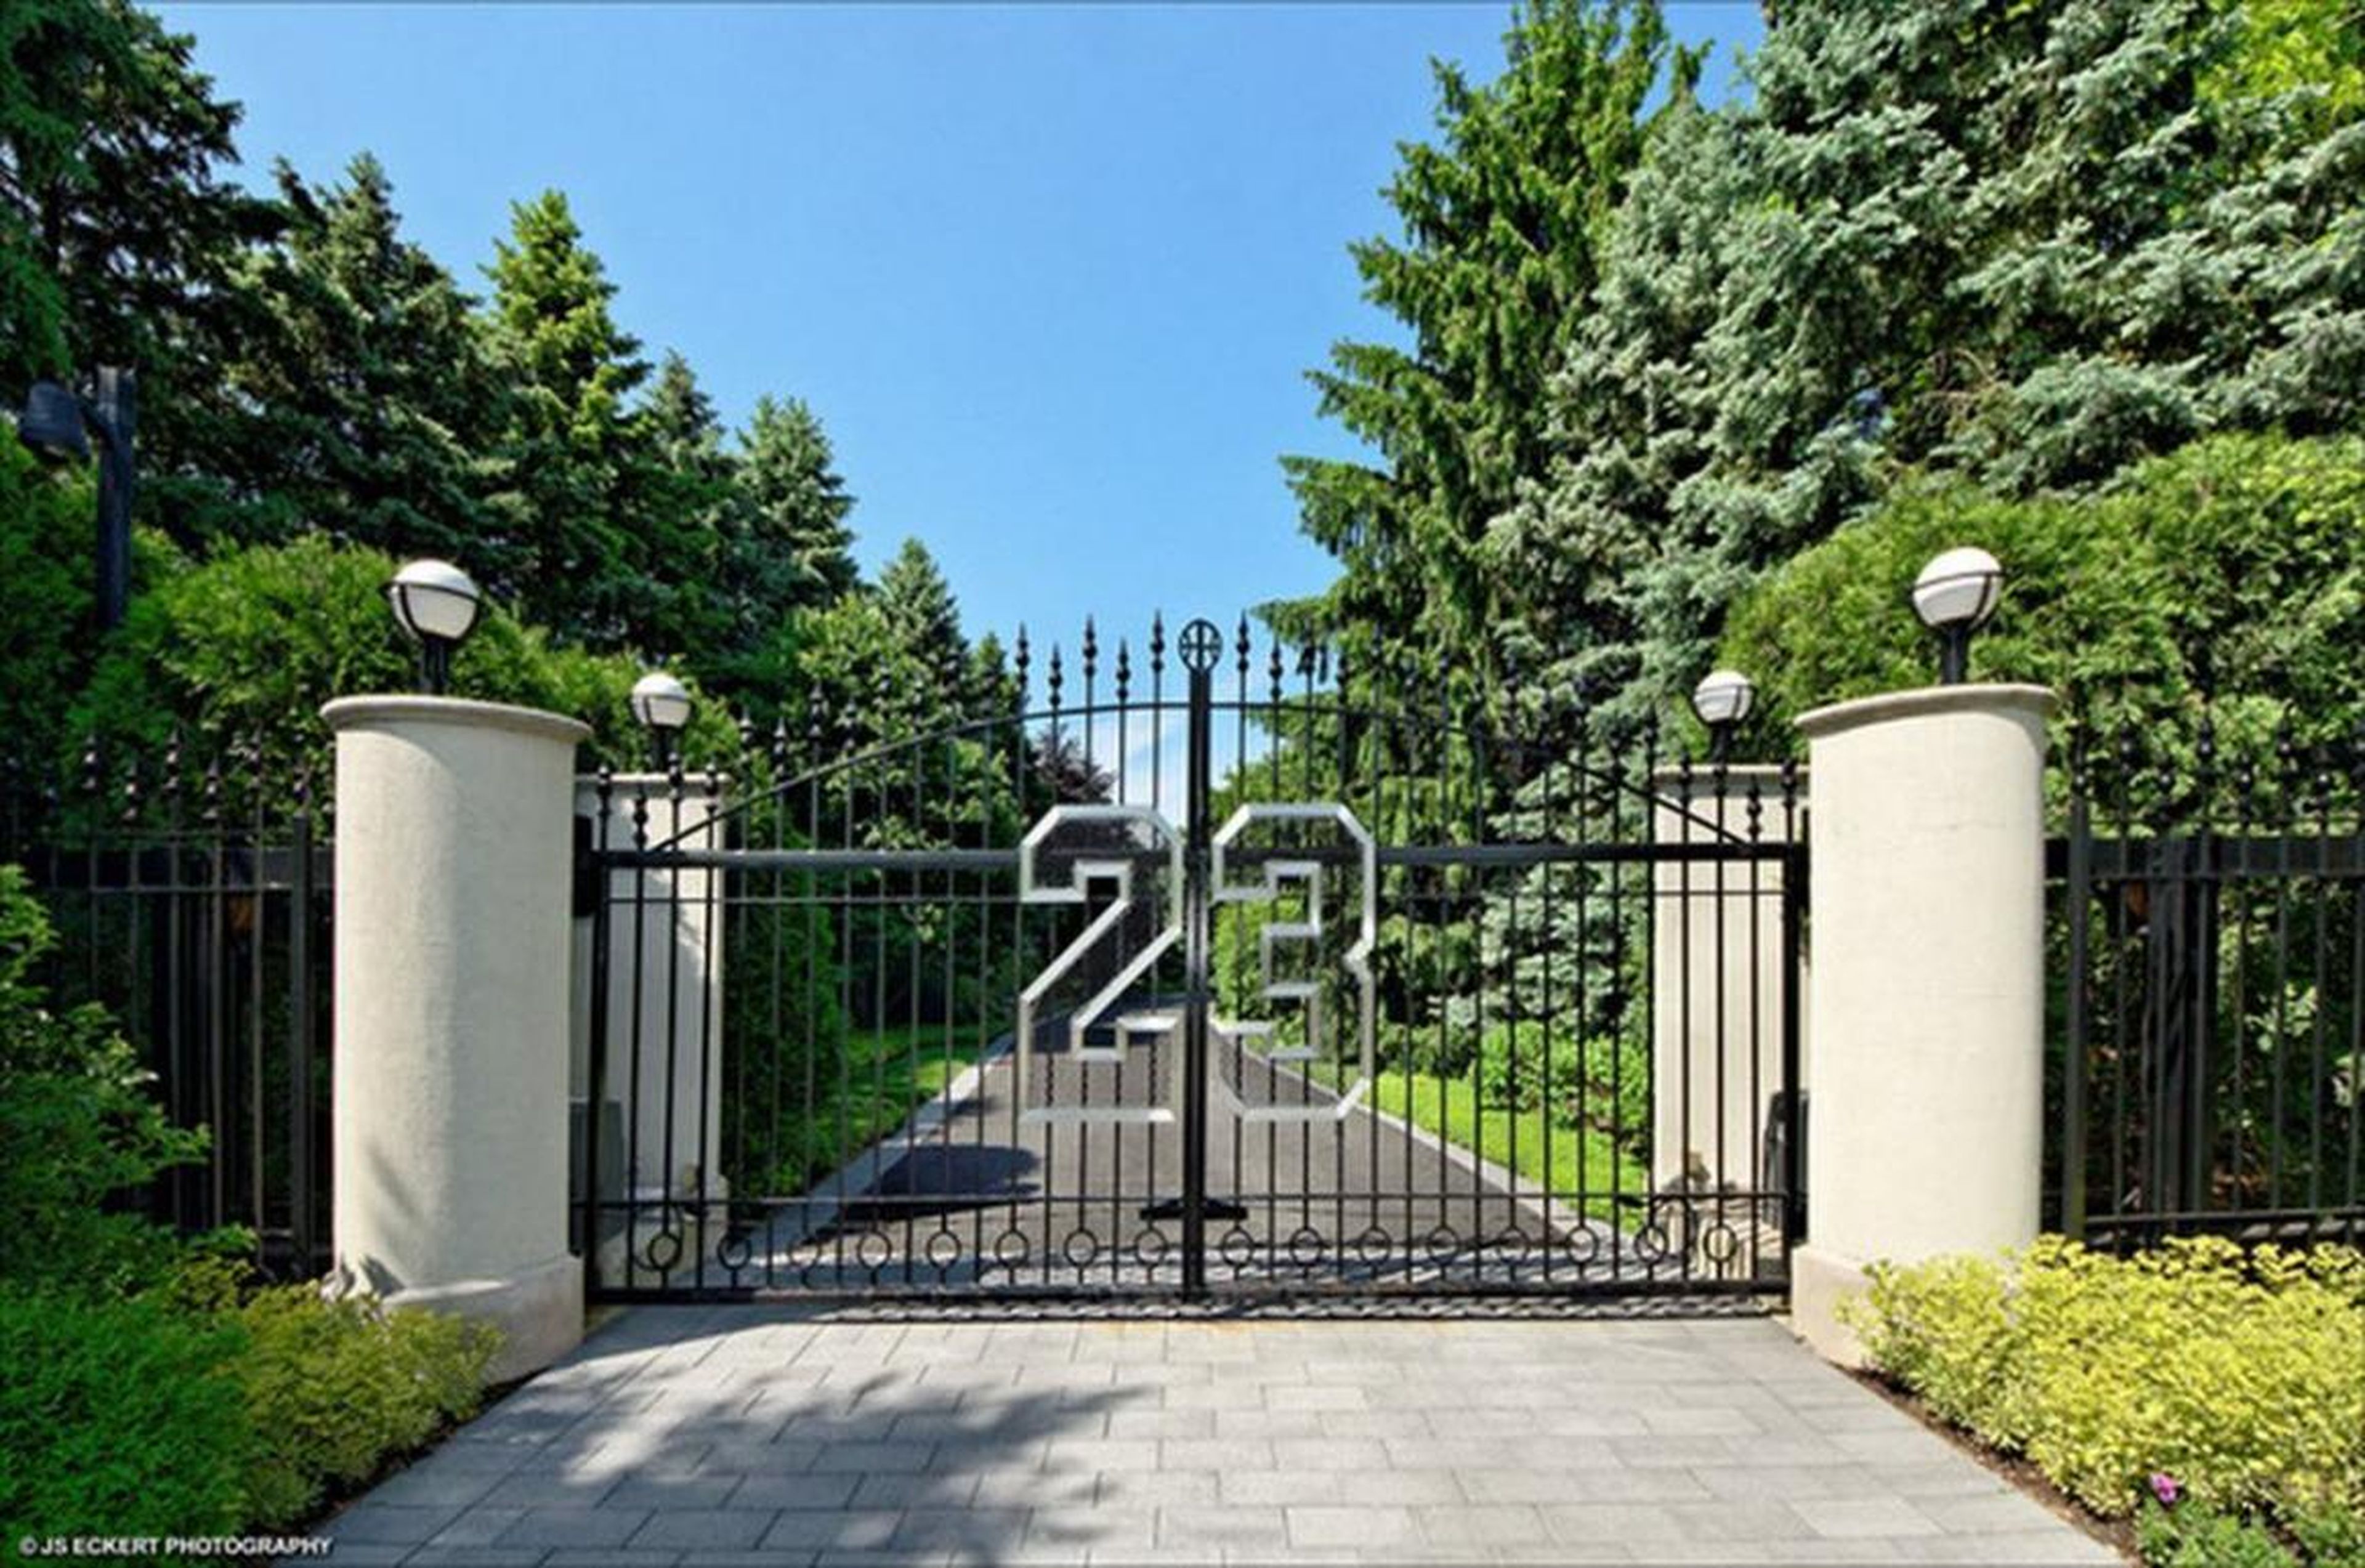 Anyone who approaches from the ground can tell right away that this estate belongs to the legendary No. 23, Michael Jordan — and that might be what's keeping it from selling. "It's clearly his home," said Bruce Bowers of Bowers